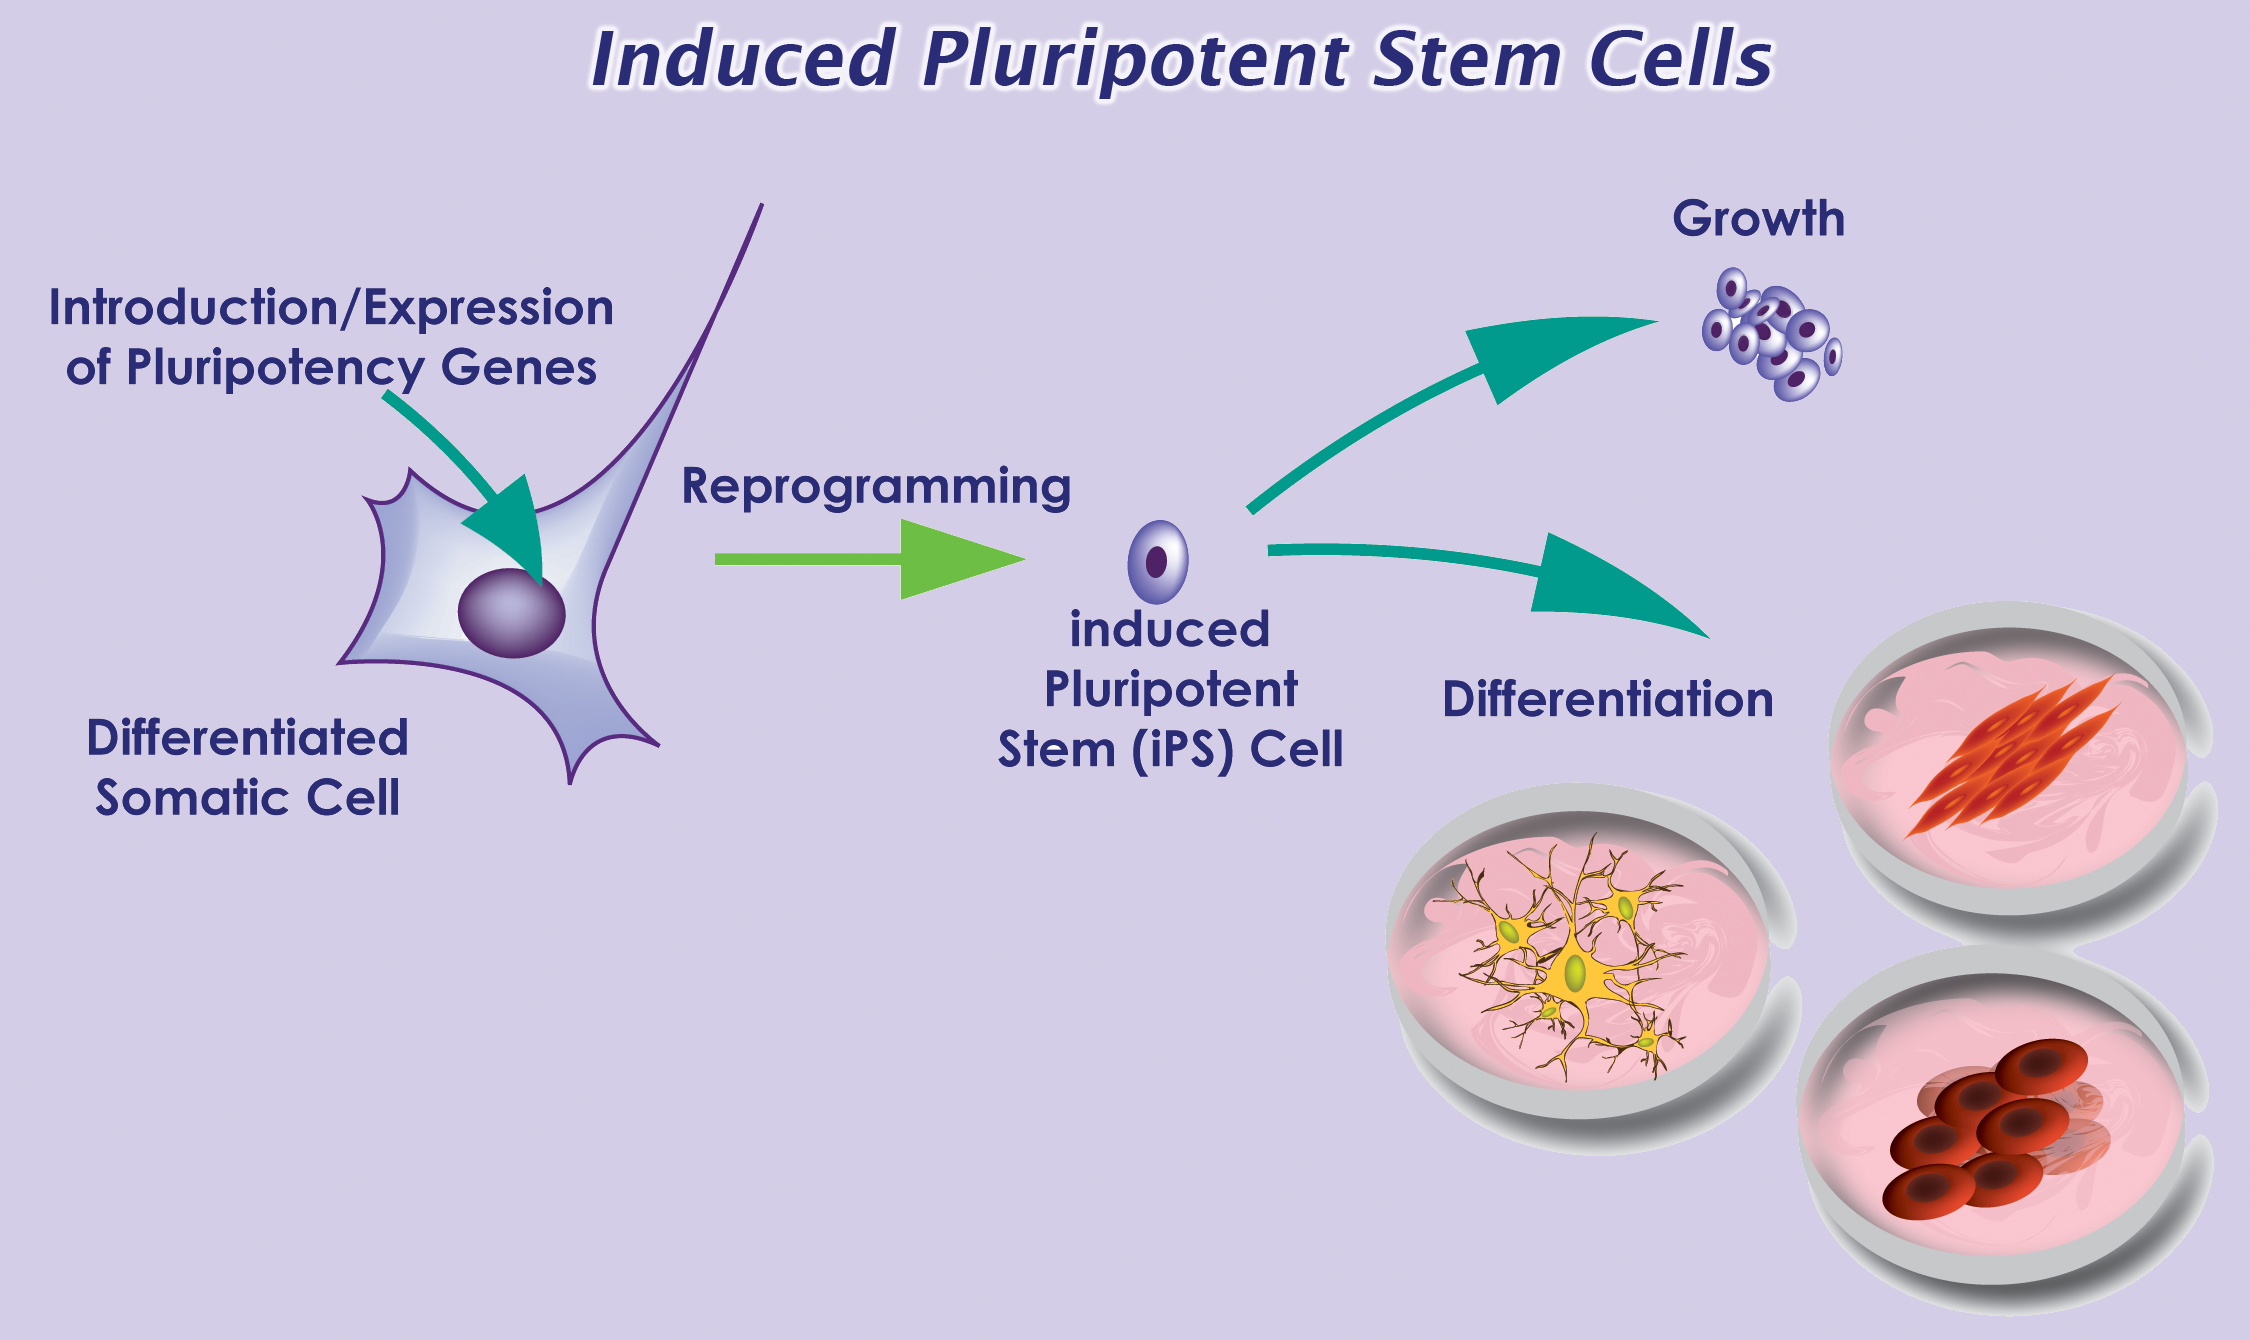 induced pluripotent stem cells vs embryonic stem cells